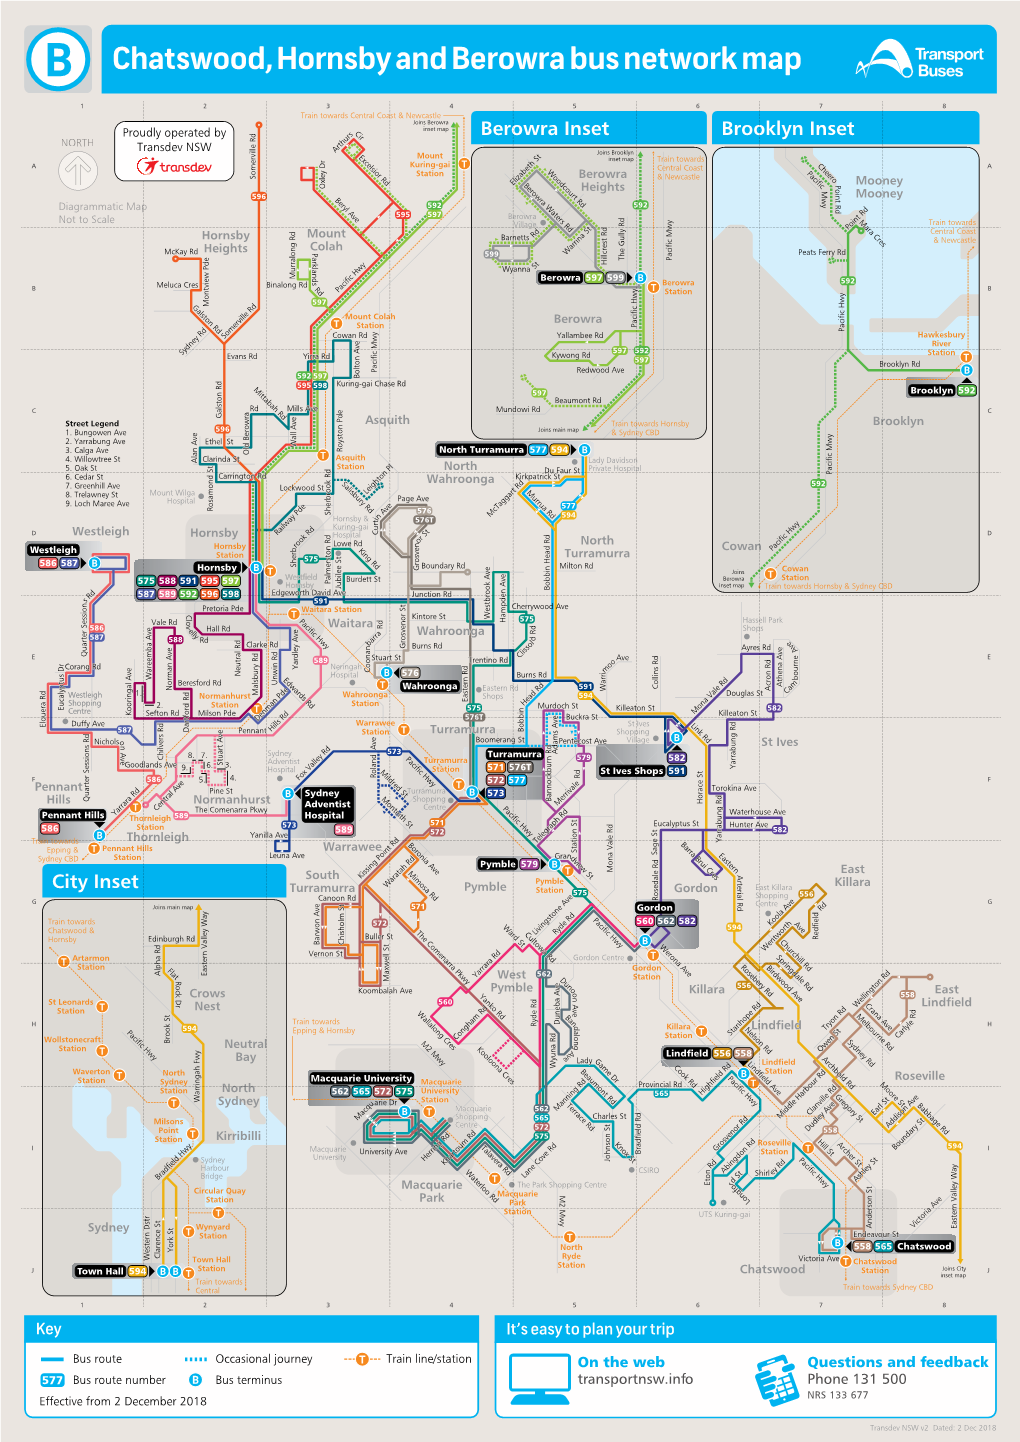 Chatswood, Hornsby and Berowra Bus Network Map